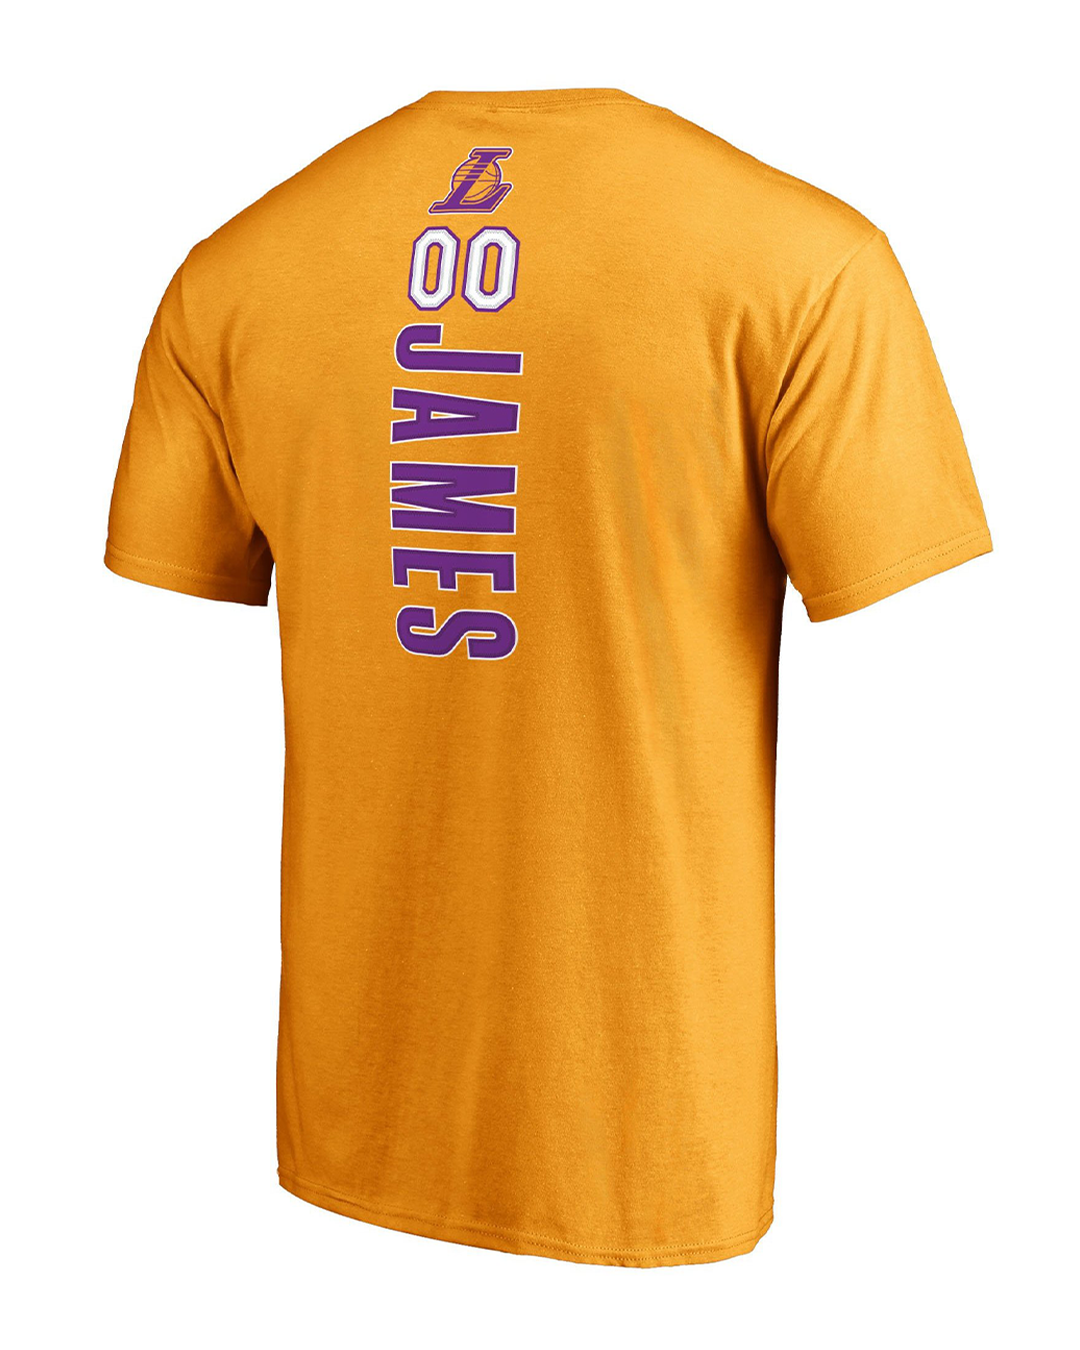 lakers name and number shirt